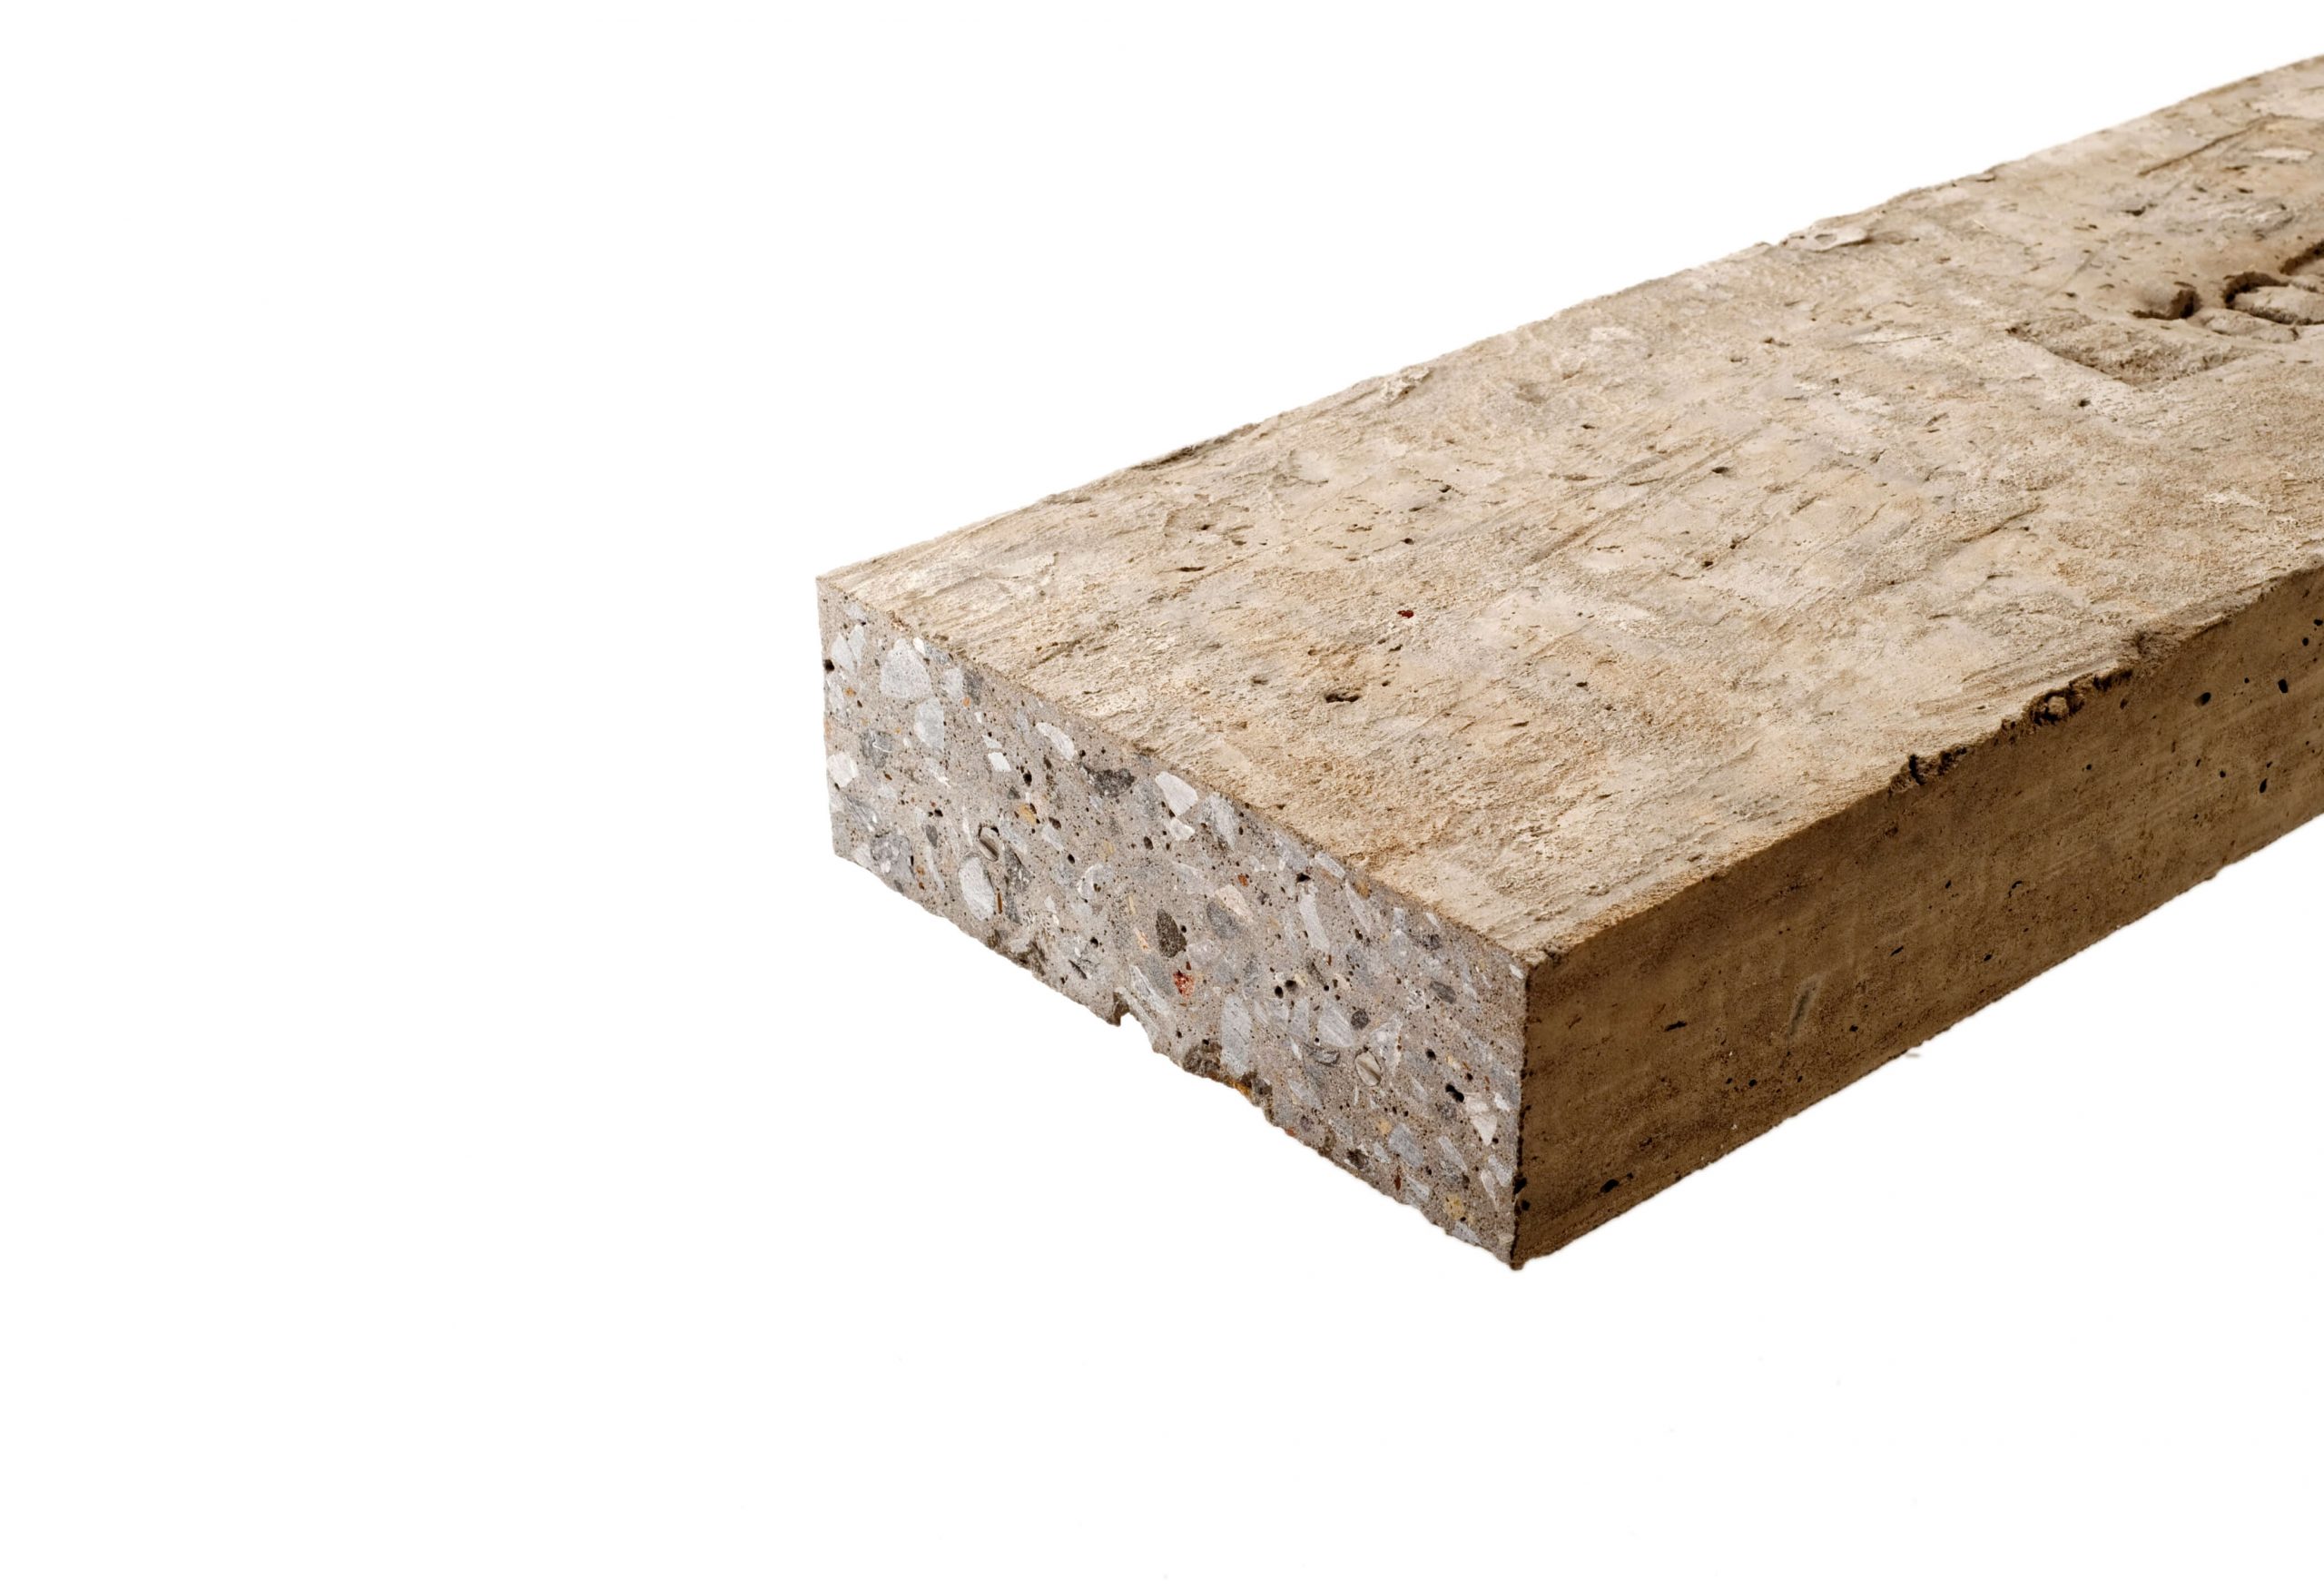 What is a lintel and why do I need one?